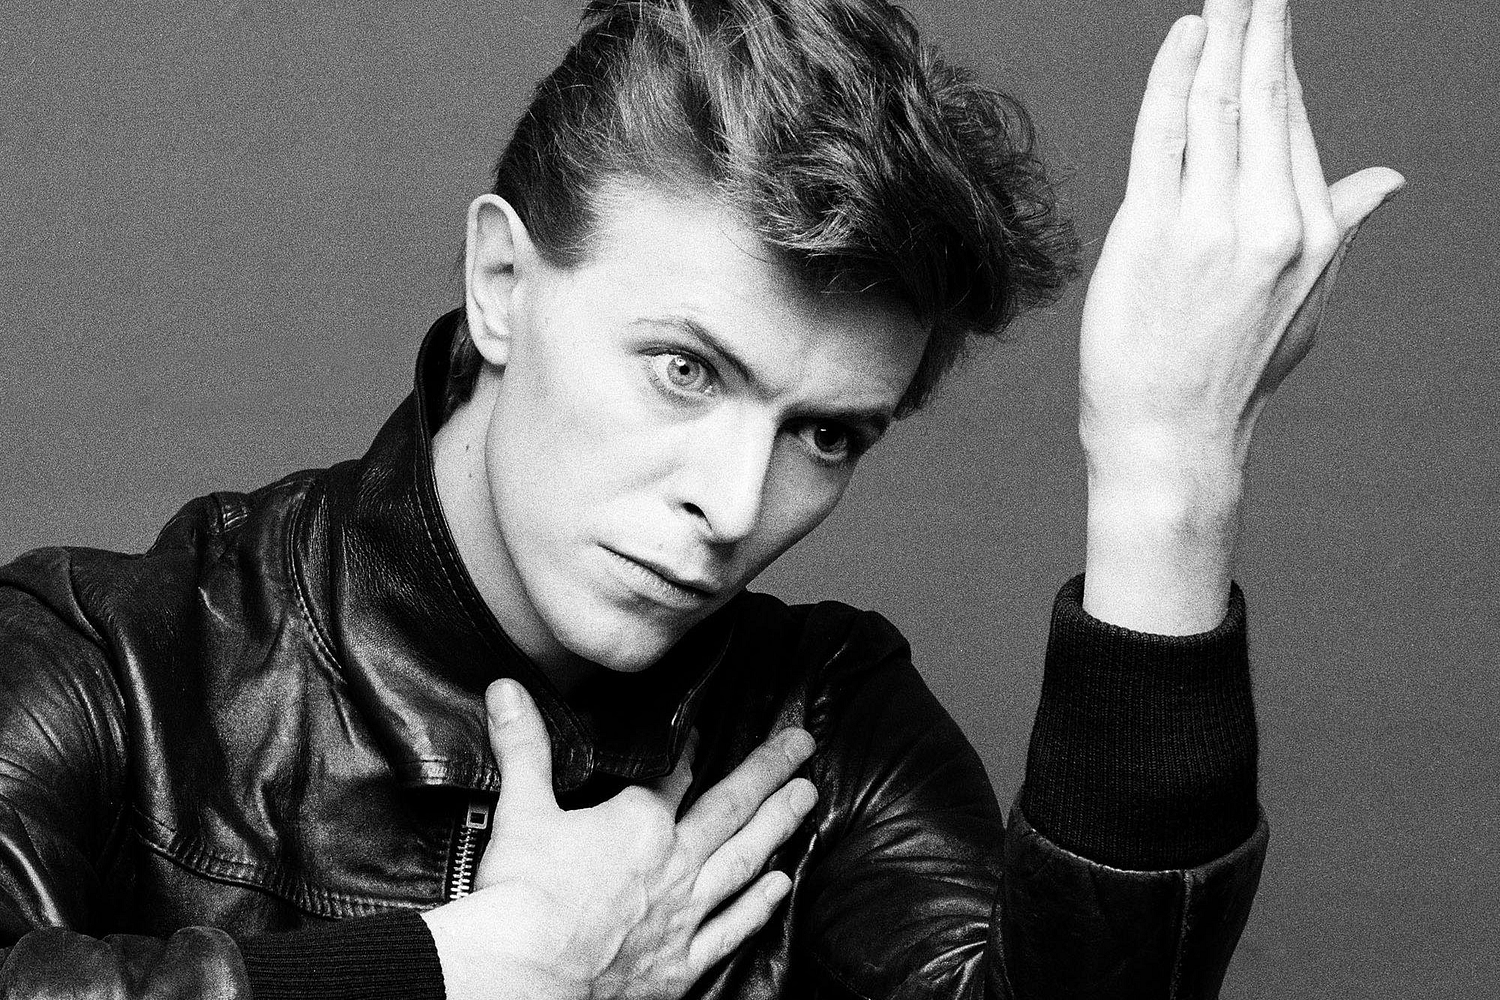 Glastonbury Festival will put on an official David Bowie tribute